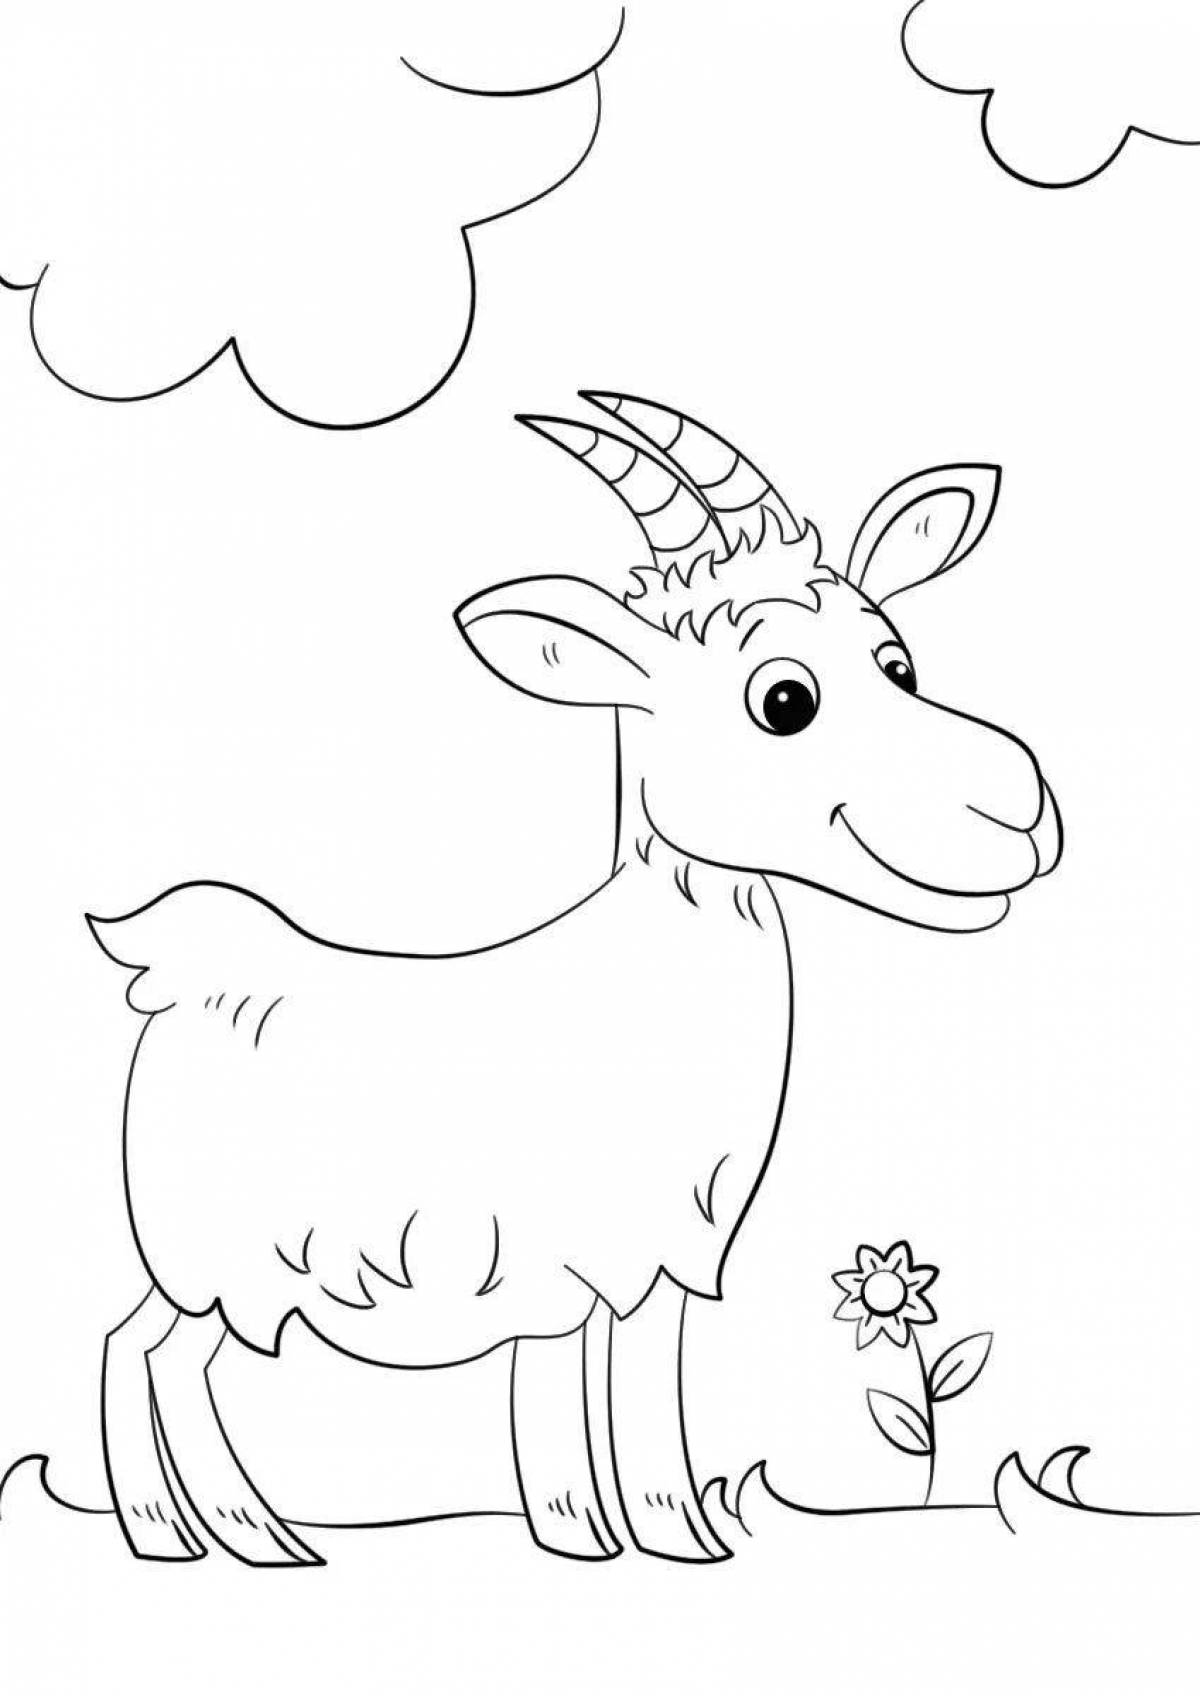 Coloring fluffy goat for kids